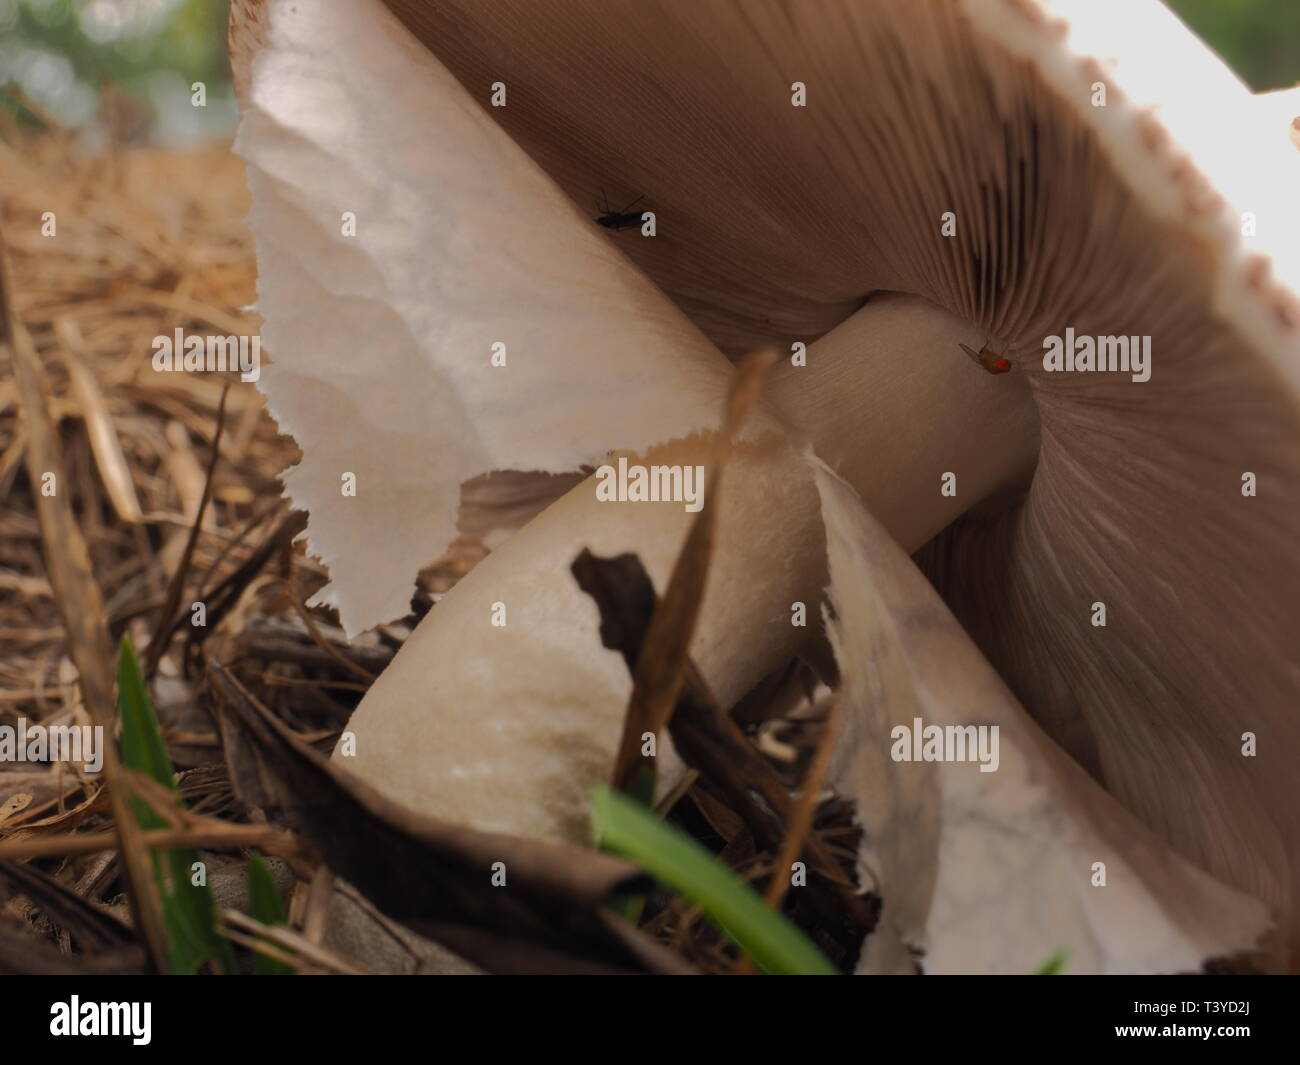 Mushrooms. White capped, wild mushrooms growing under a tree in a field. Stock Photo